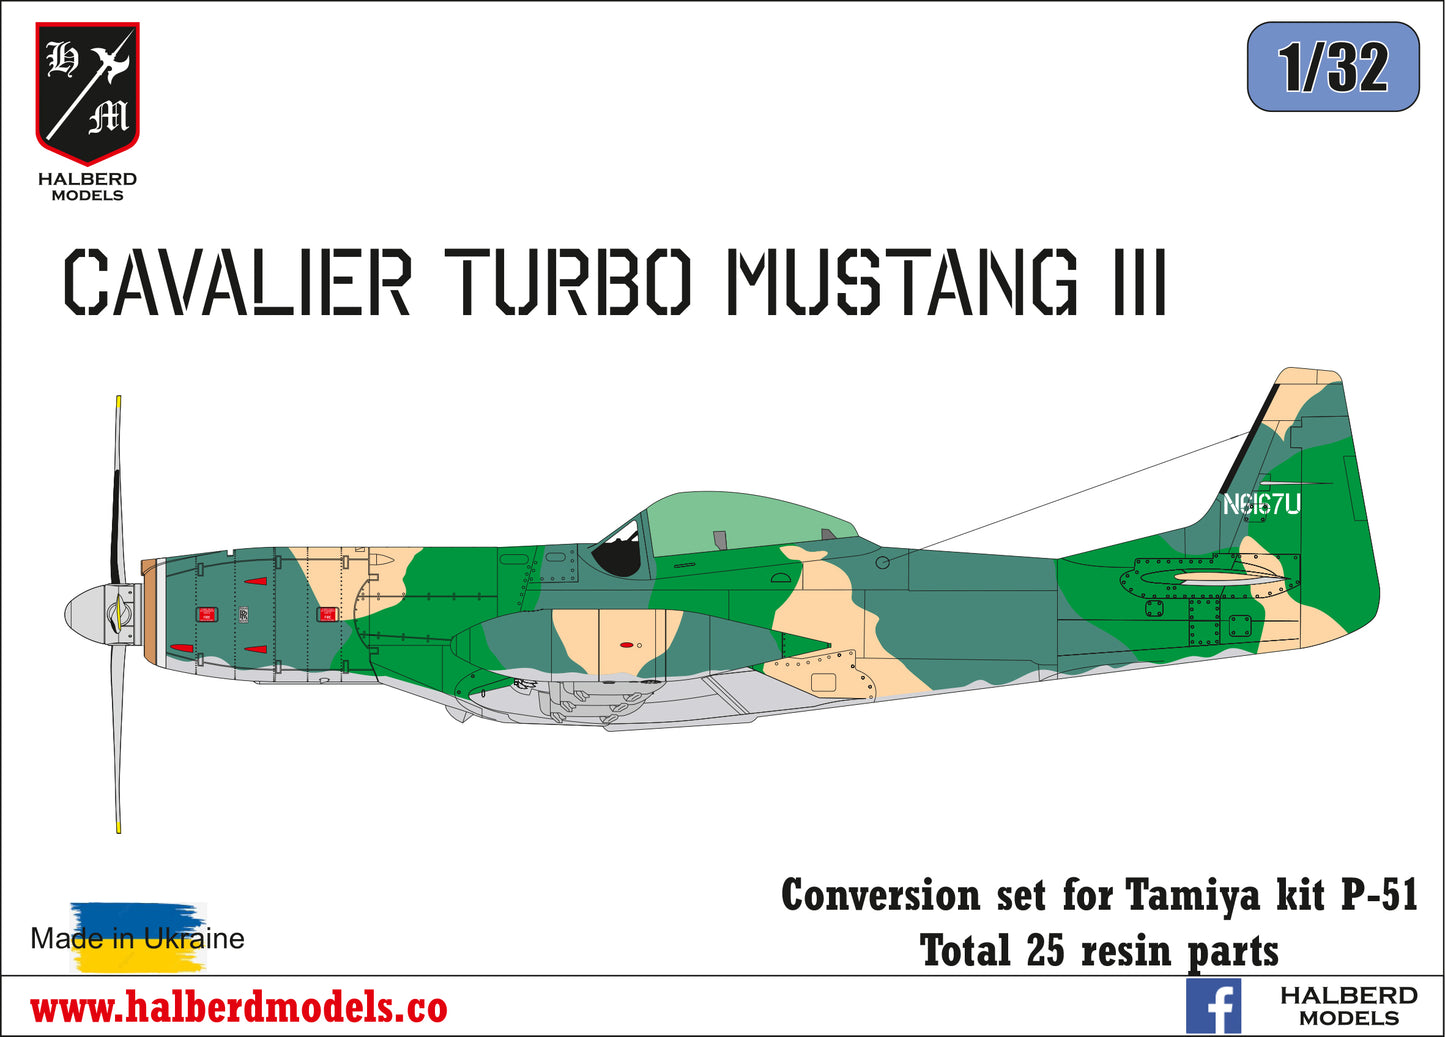 Cavalier Turbo Mustang III Conversion Kit for Tamiya P-51D 1/32 Scale